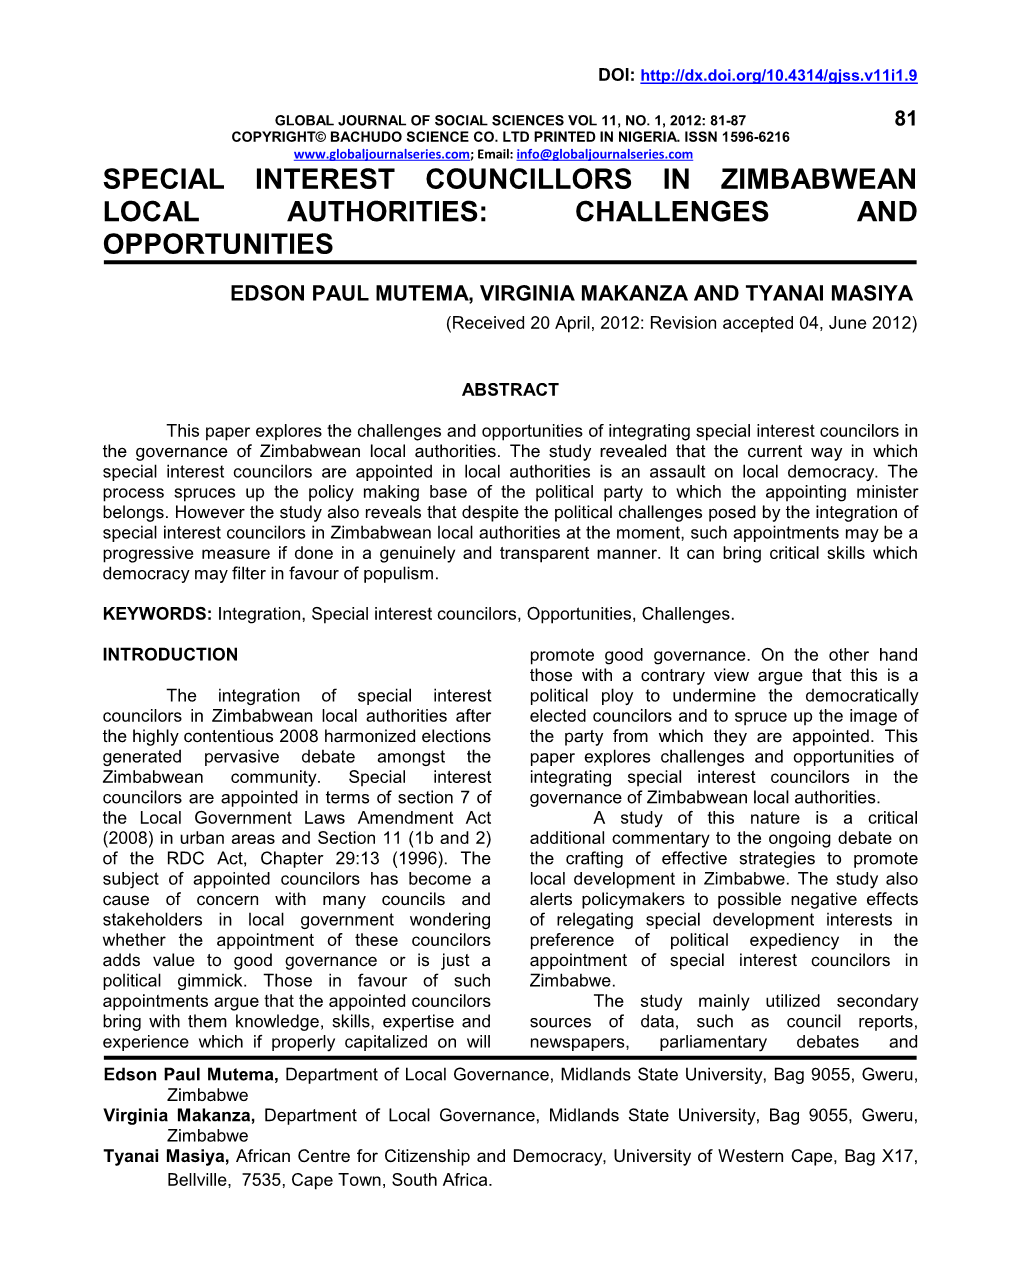 Special Interest Councillors in Zimbabwean Local Authorities: Challenges and Opportunities